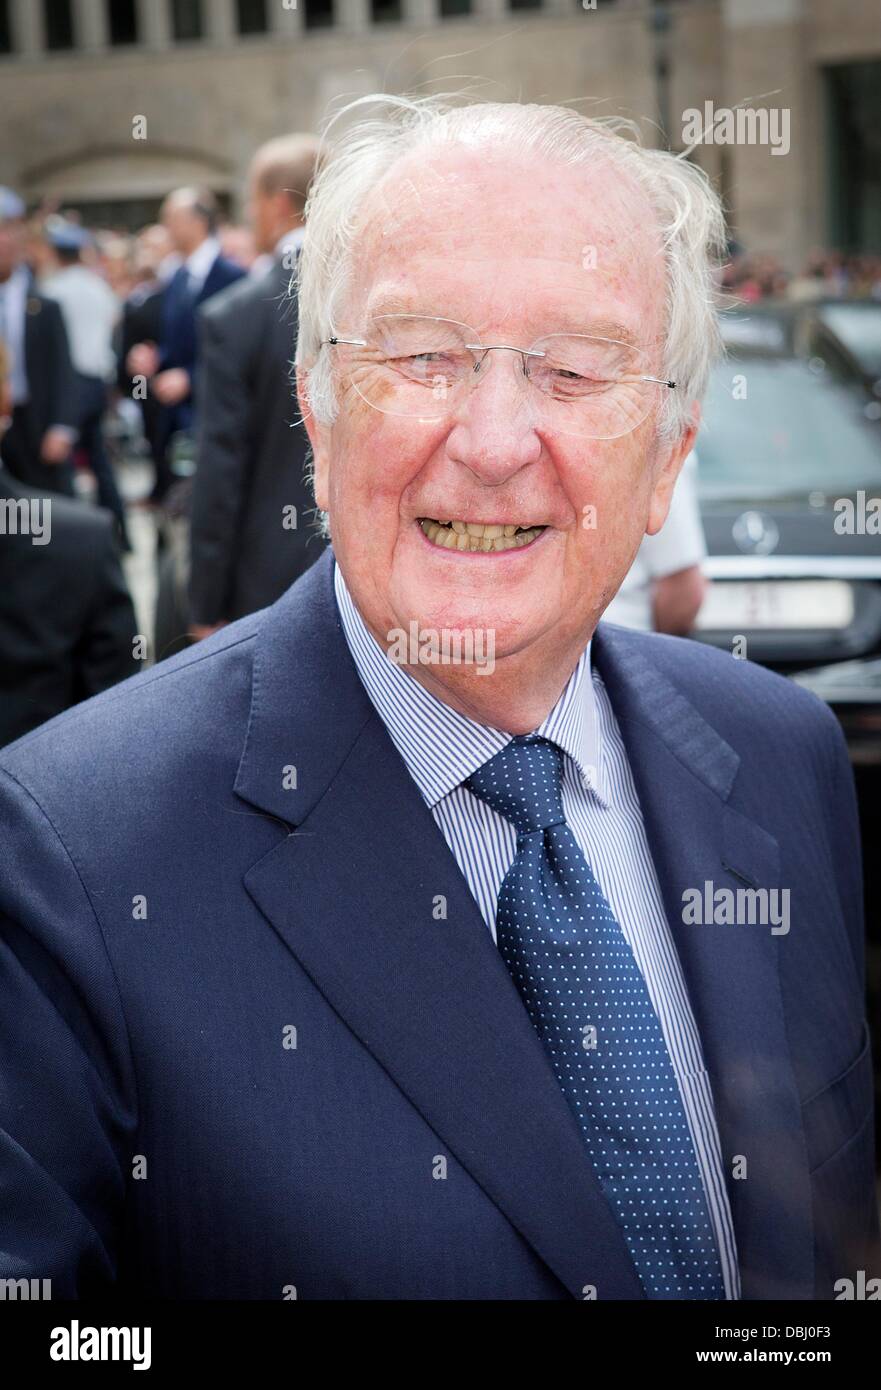 Brussels, Belgium. 31st July, 2013. King Albert of Belgium attends the mass to commemorate the death of King Baudouin 20 years ago at the Cathedral in Brussels, Belgium, 31 July 2013. Photo: Patrick van Katwijk/dpa/Alamy Live News Stock Photo